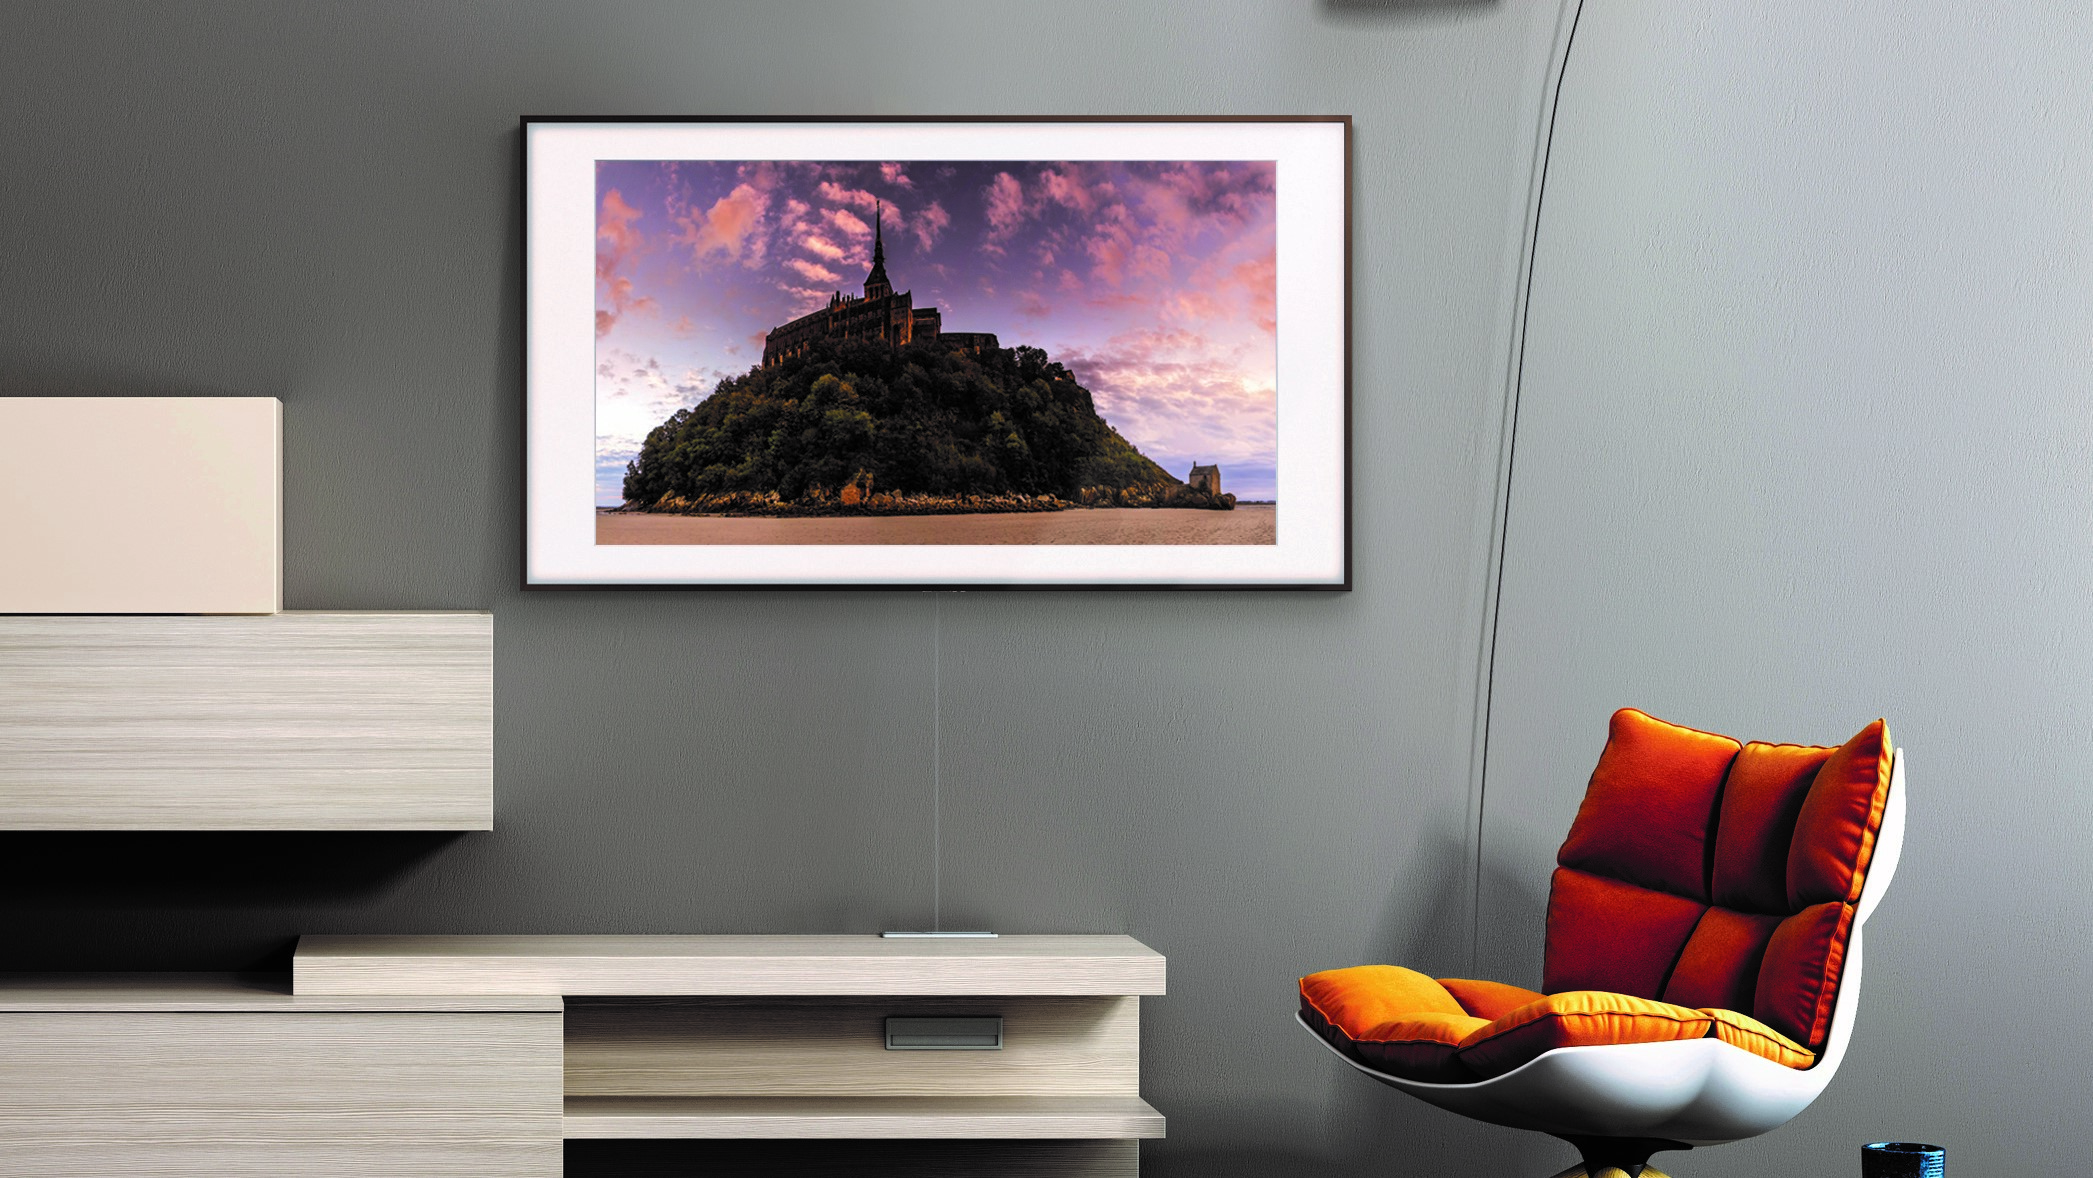 Samsung The Frame television